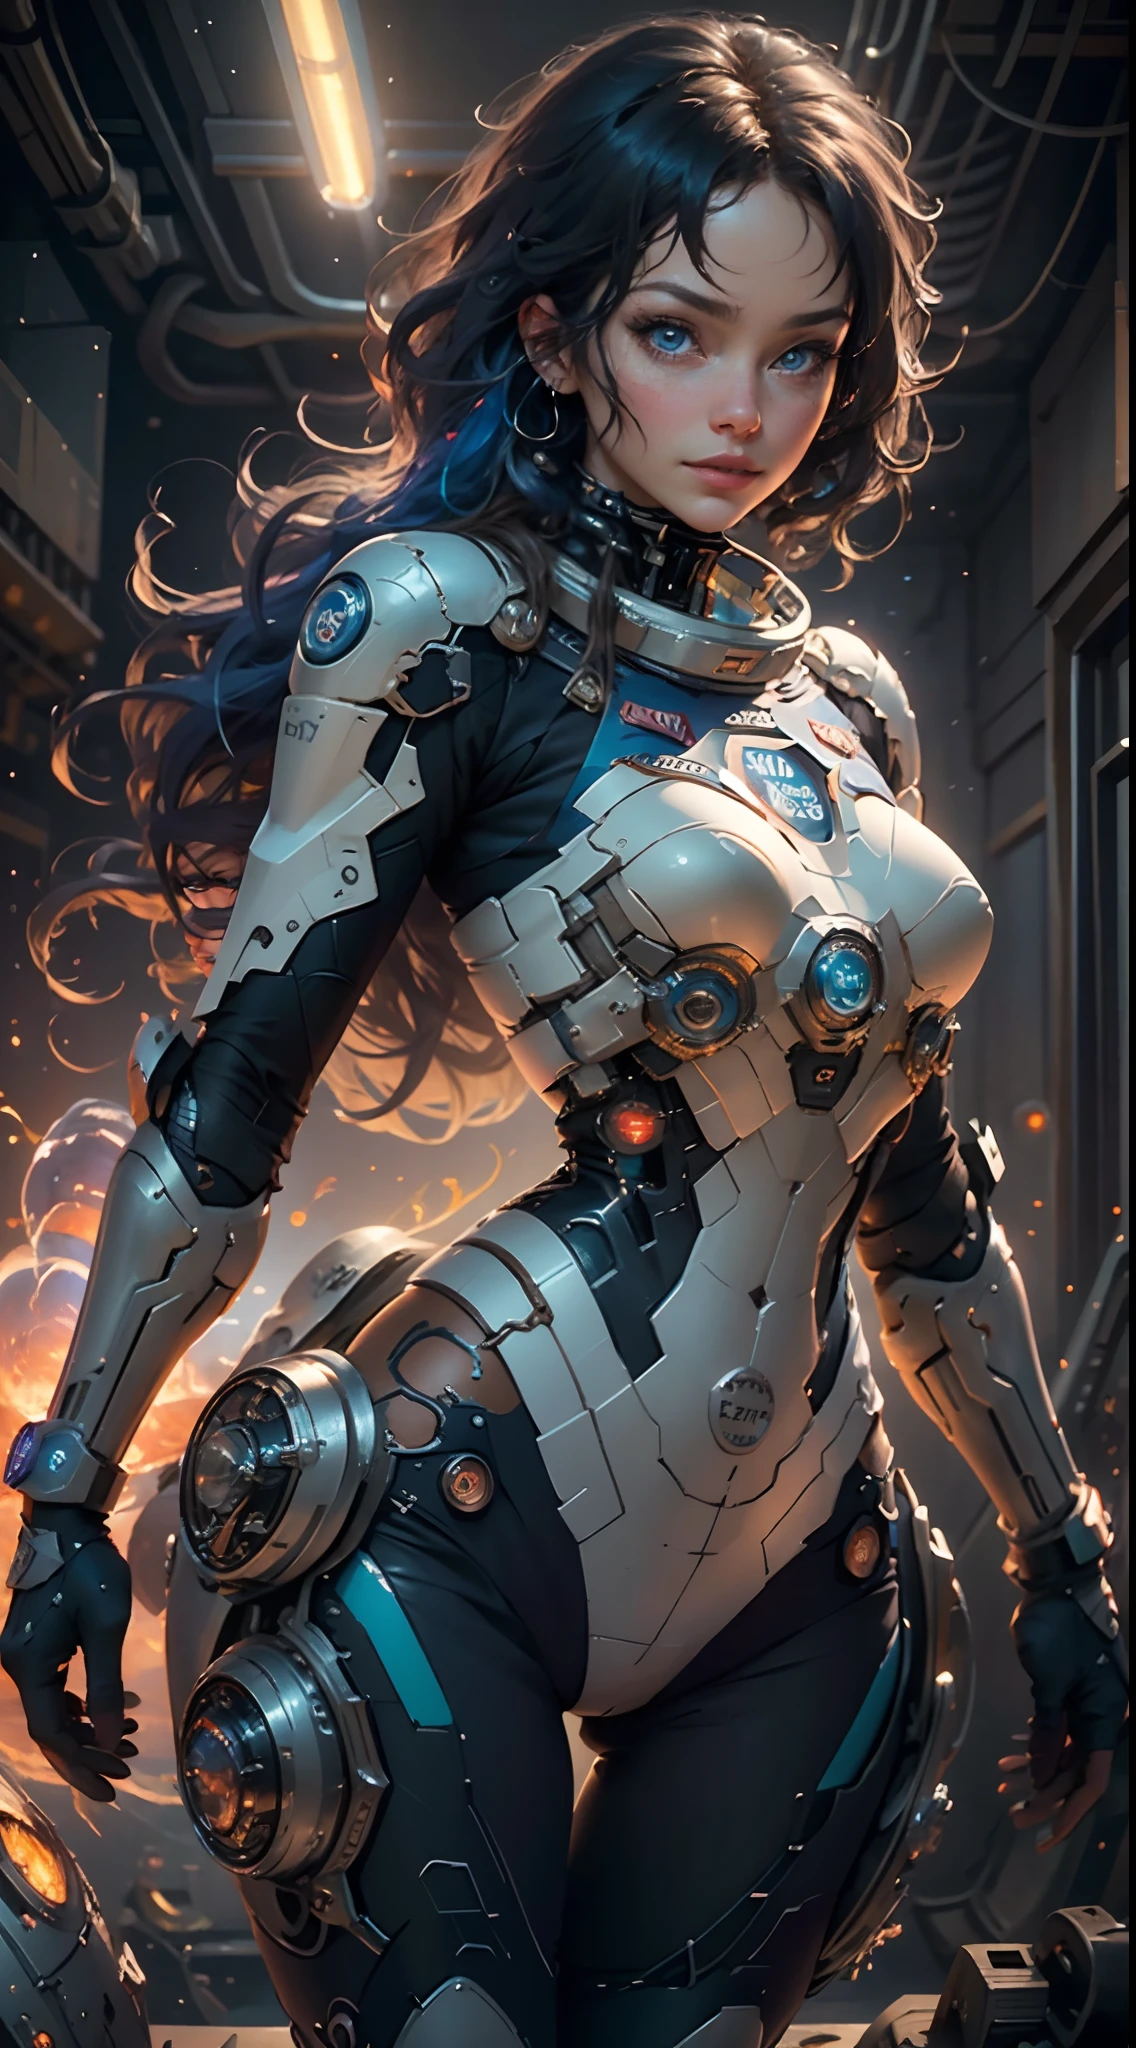 unreal engine:1.4,UHD,The best quality:1.4, photorealistic:1.4, skin texture:1.4, Masterpiece:1.8,Beautiful woman, Space Station ,blue background,blue hair:1.4,（Beautiful and detailed eye description）,